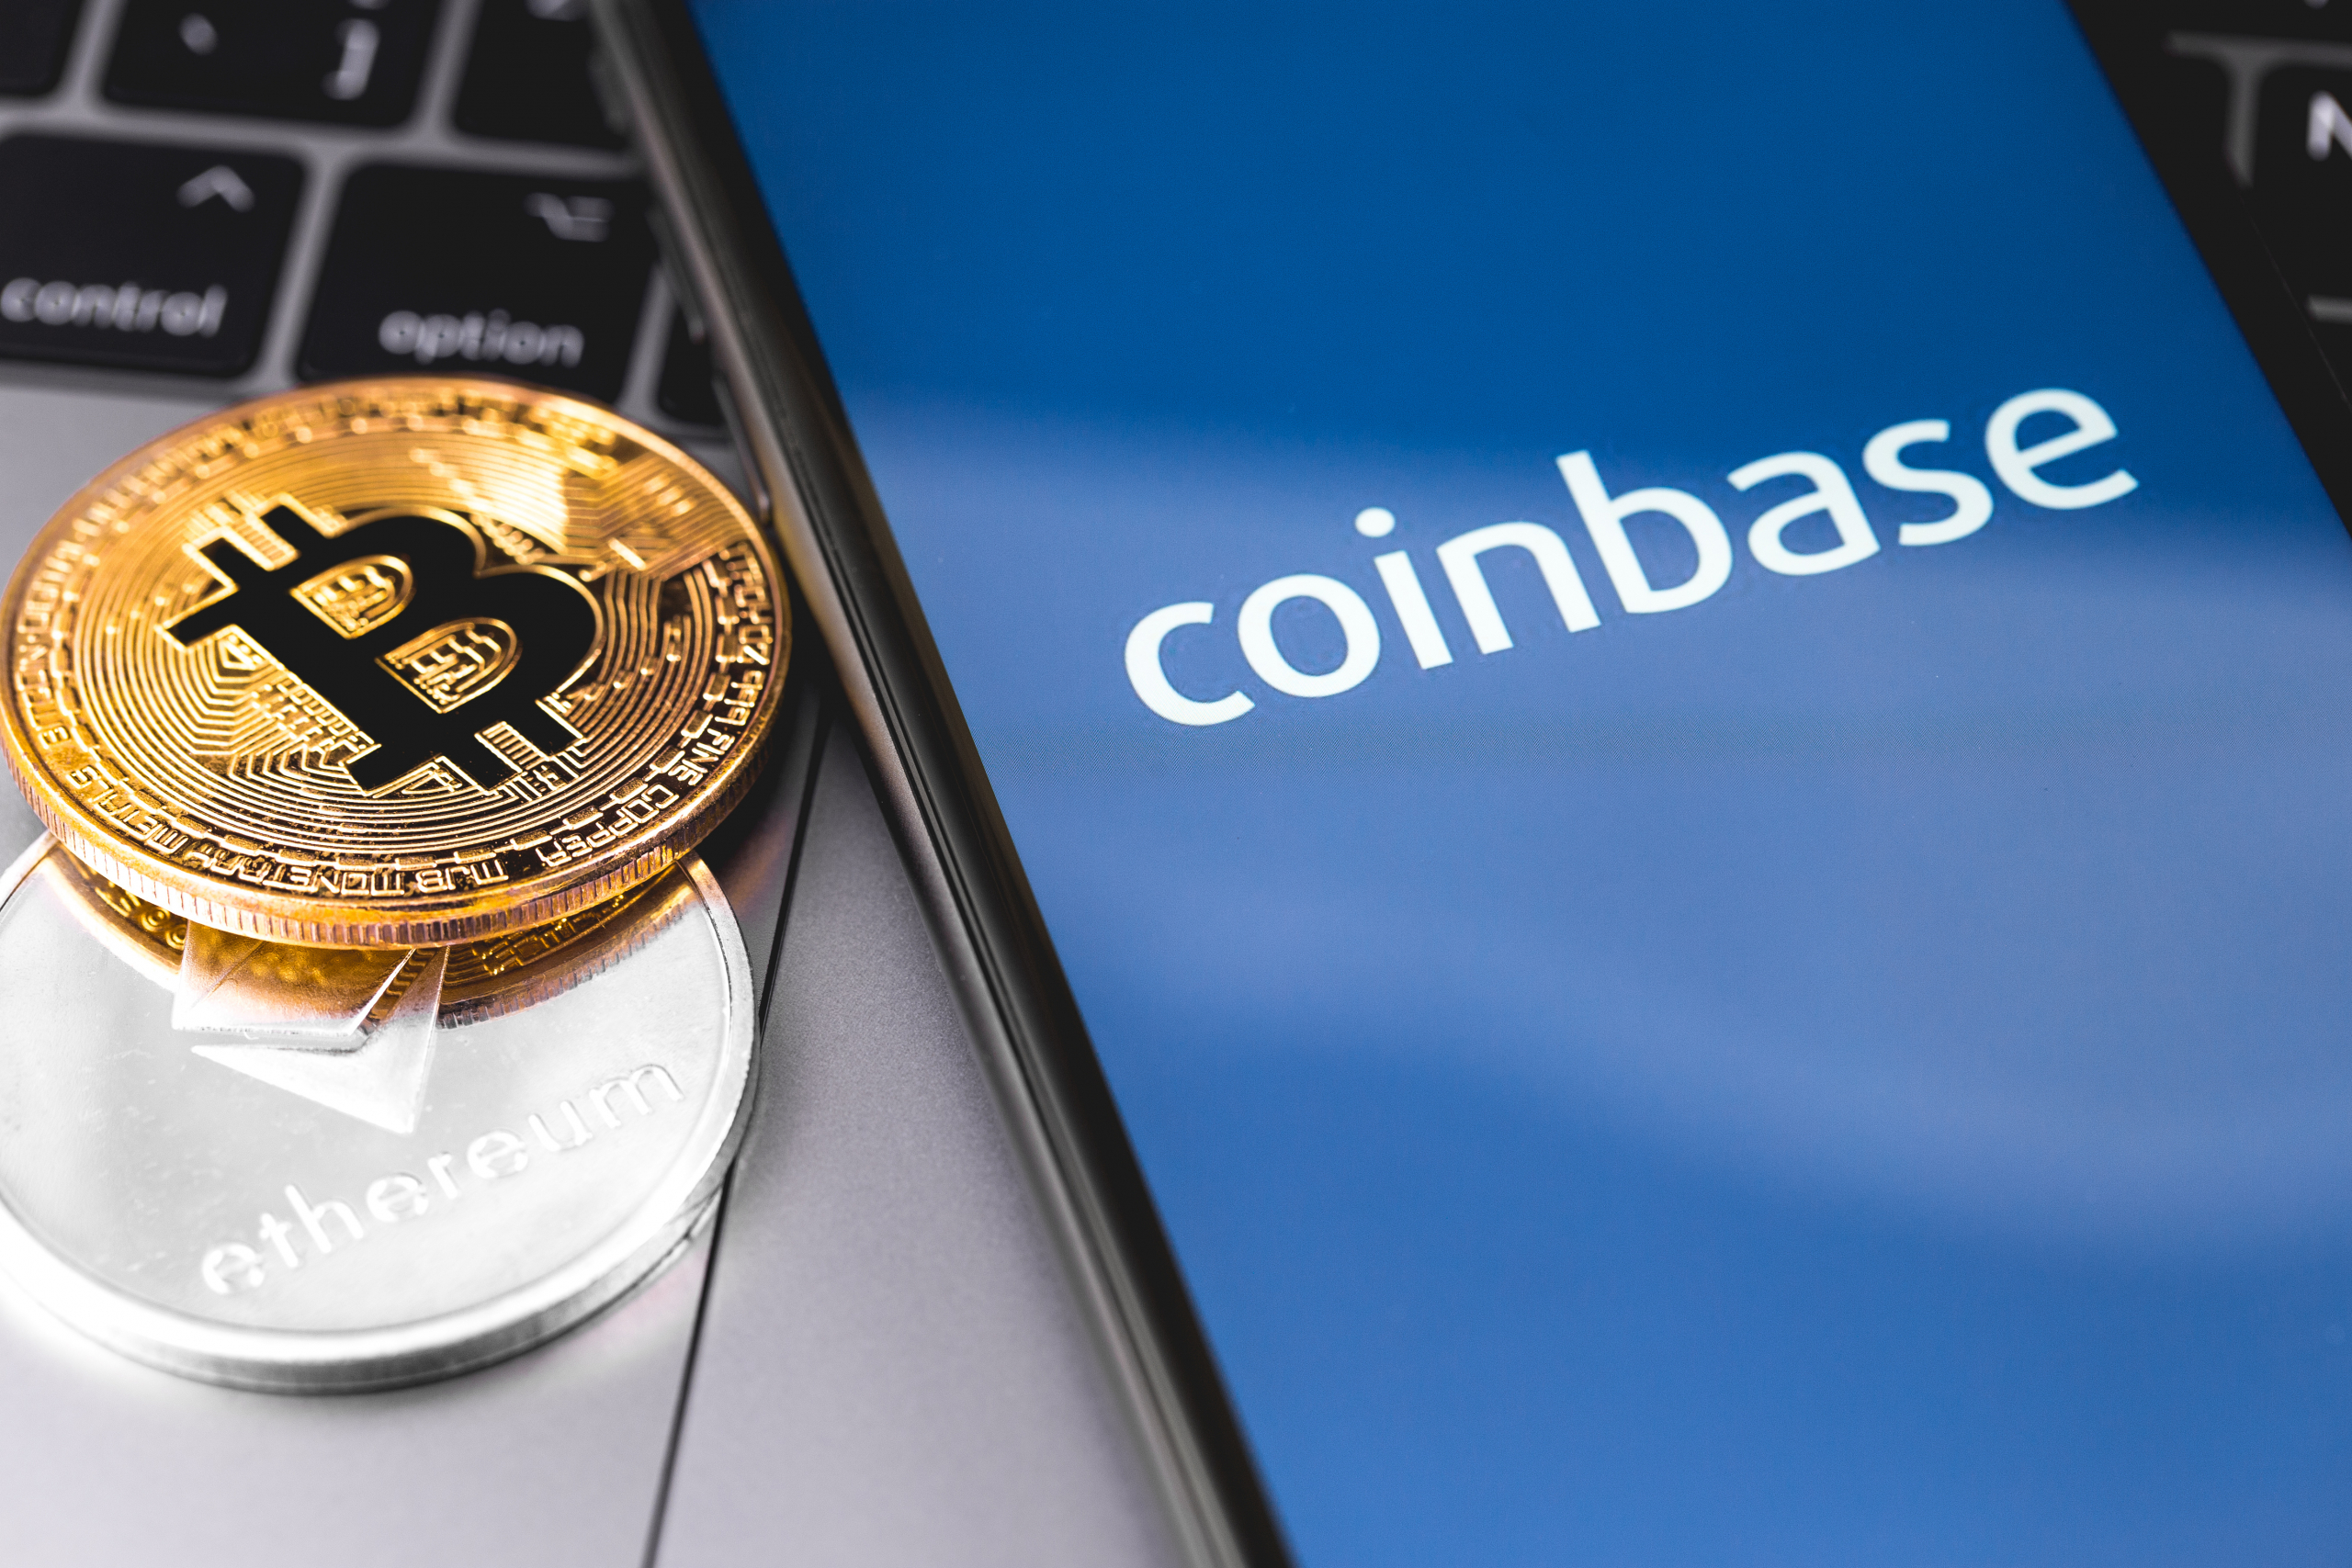 Coinbase CEO: All Funds Are Safe
